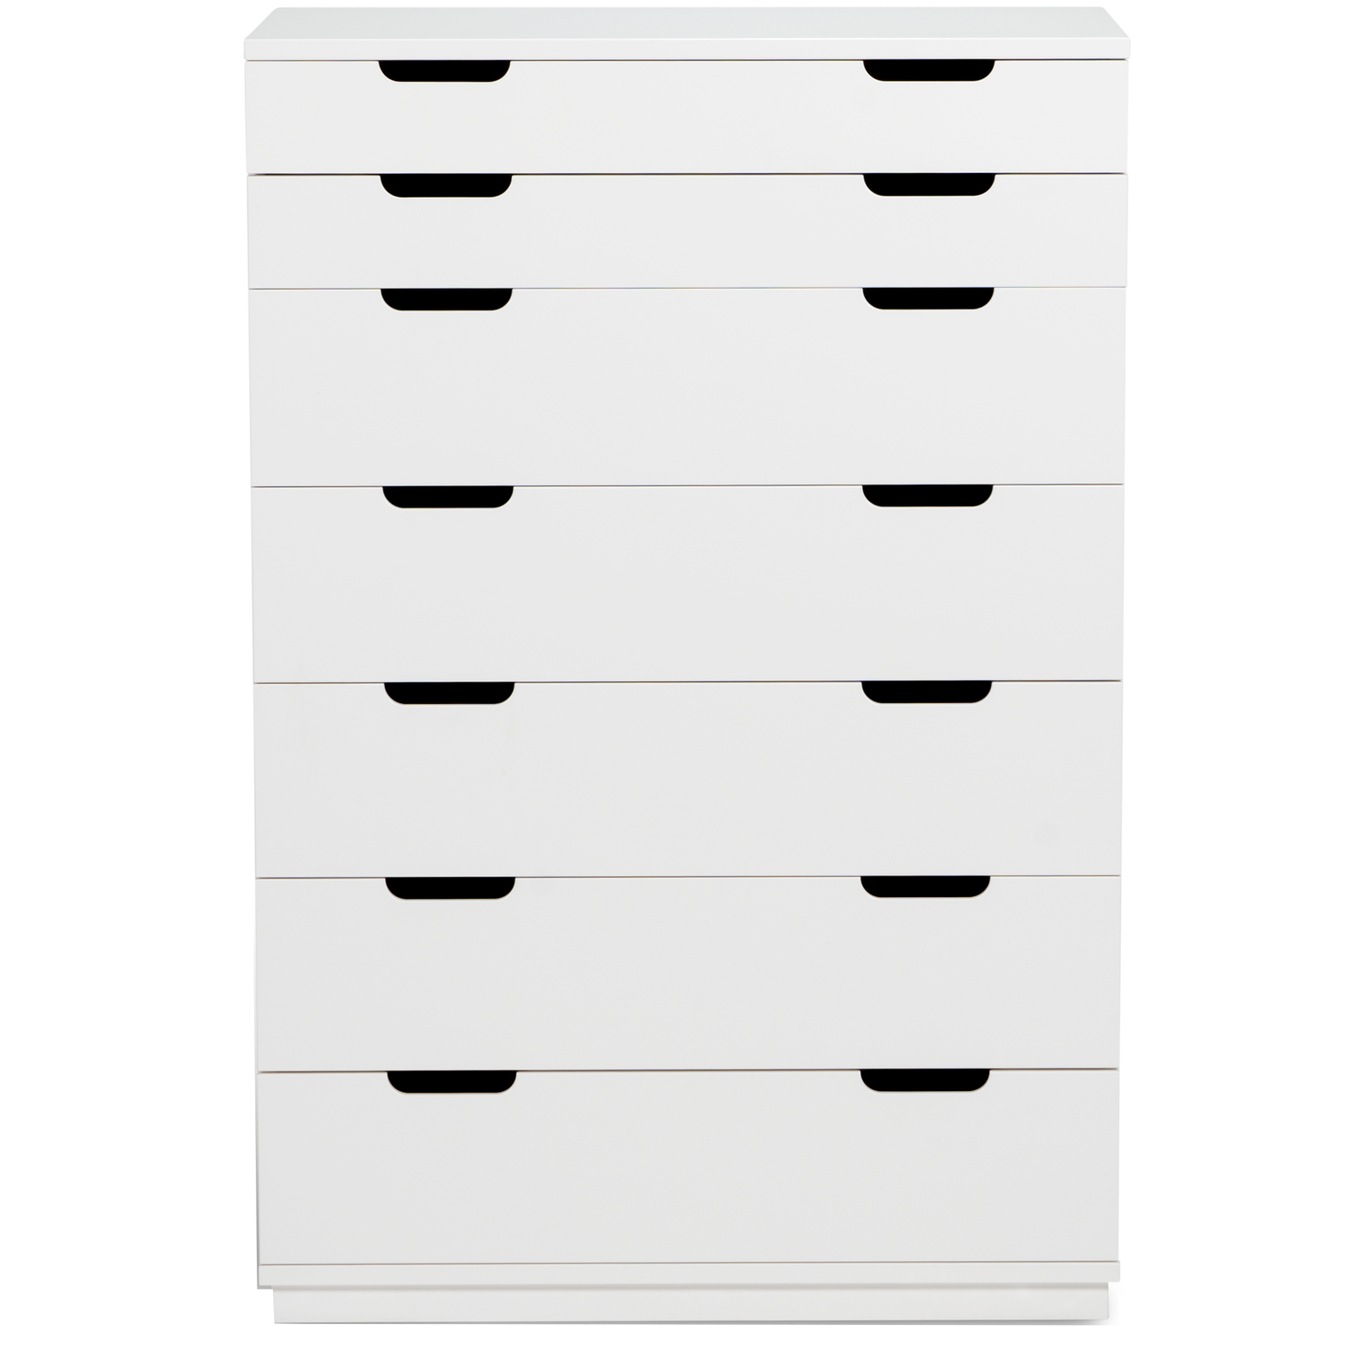 Aoko Chest Of Drawers With 7 Drawers, White